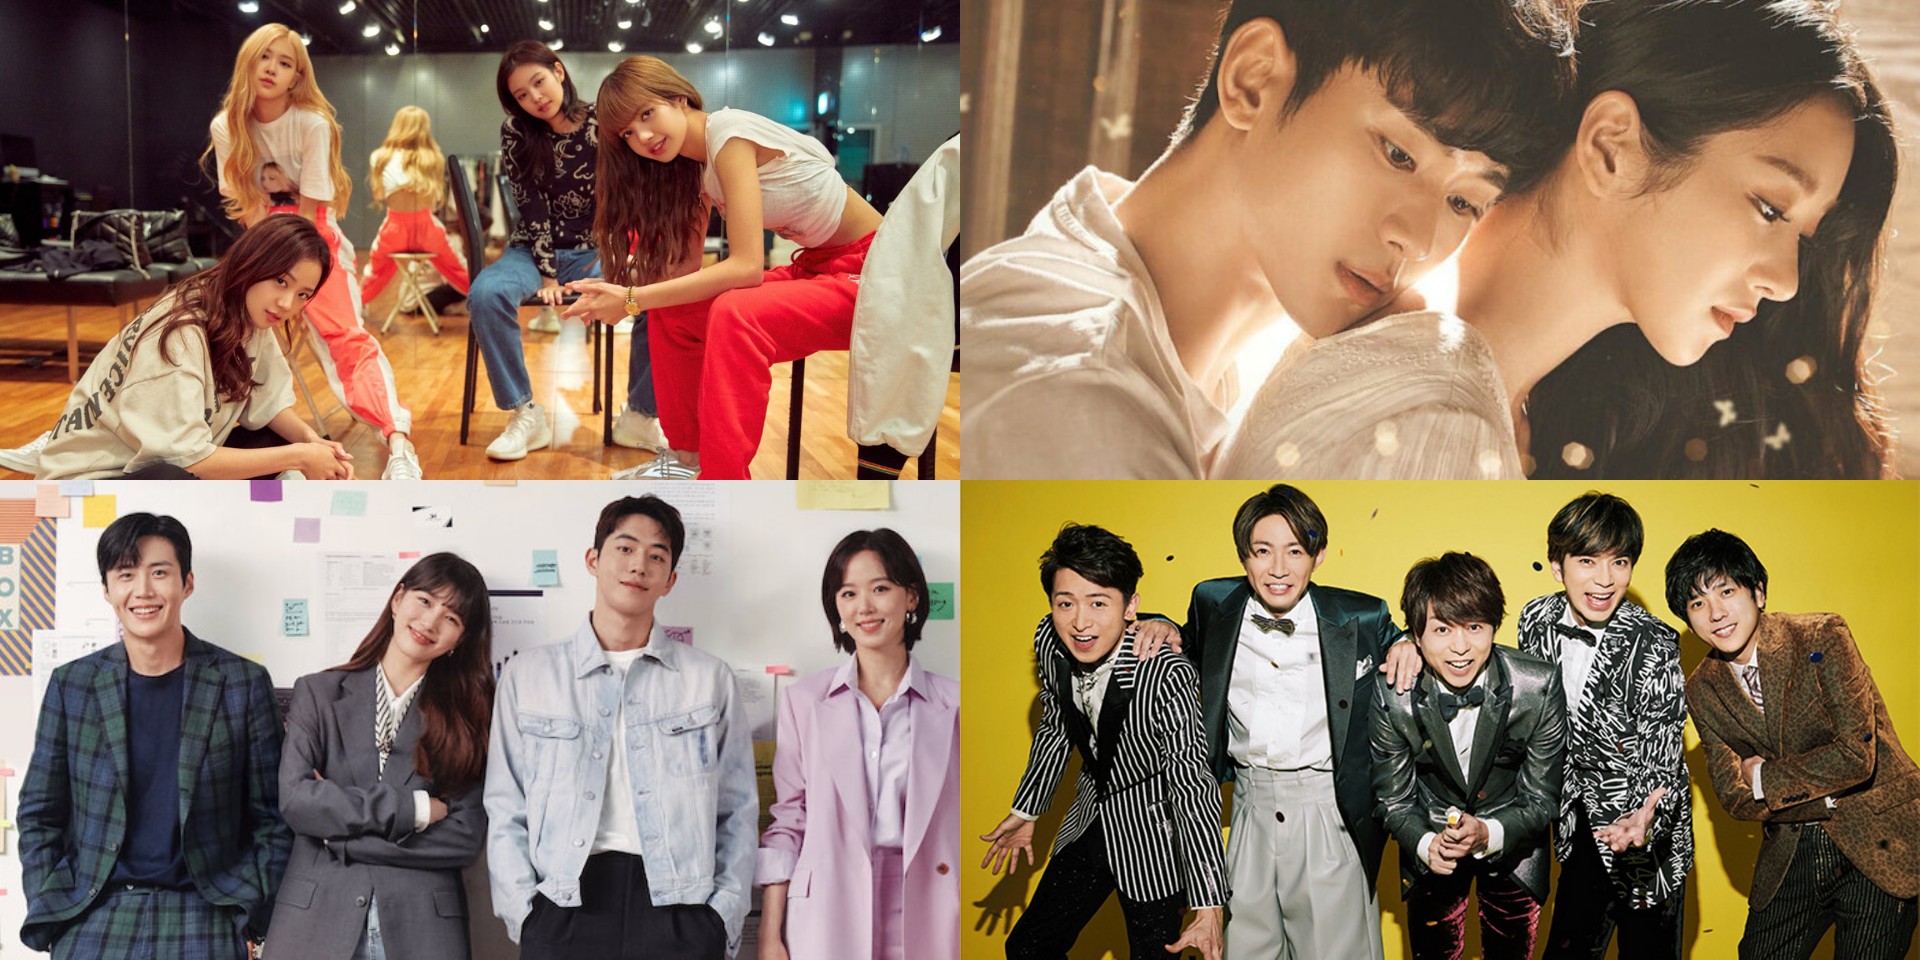 Netflix unveils 2020's most-watched shows in Asia  – BLACKPINK's Light Up the Sky, ARASHI's Diary Voyage, It's Okay To Not Be Okay, Start-Up, and more